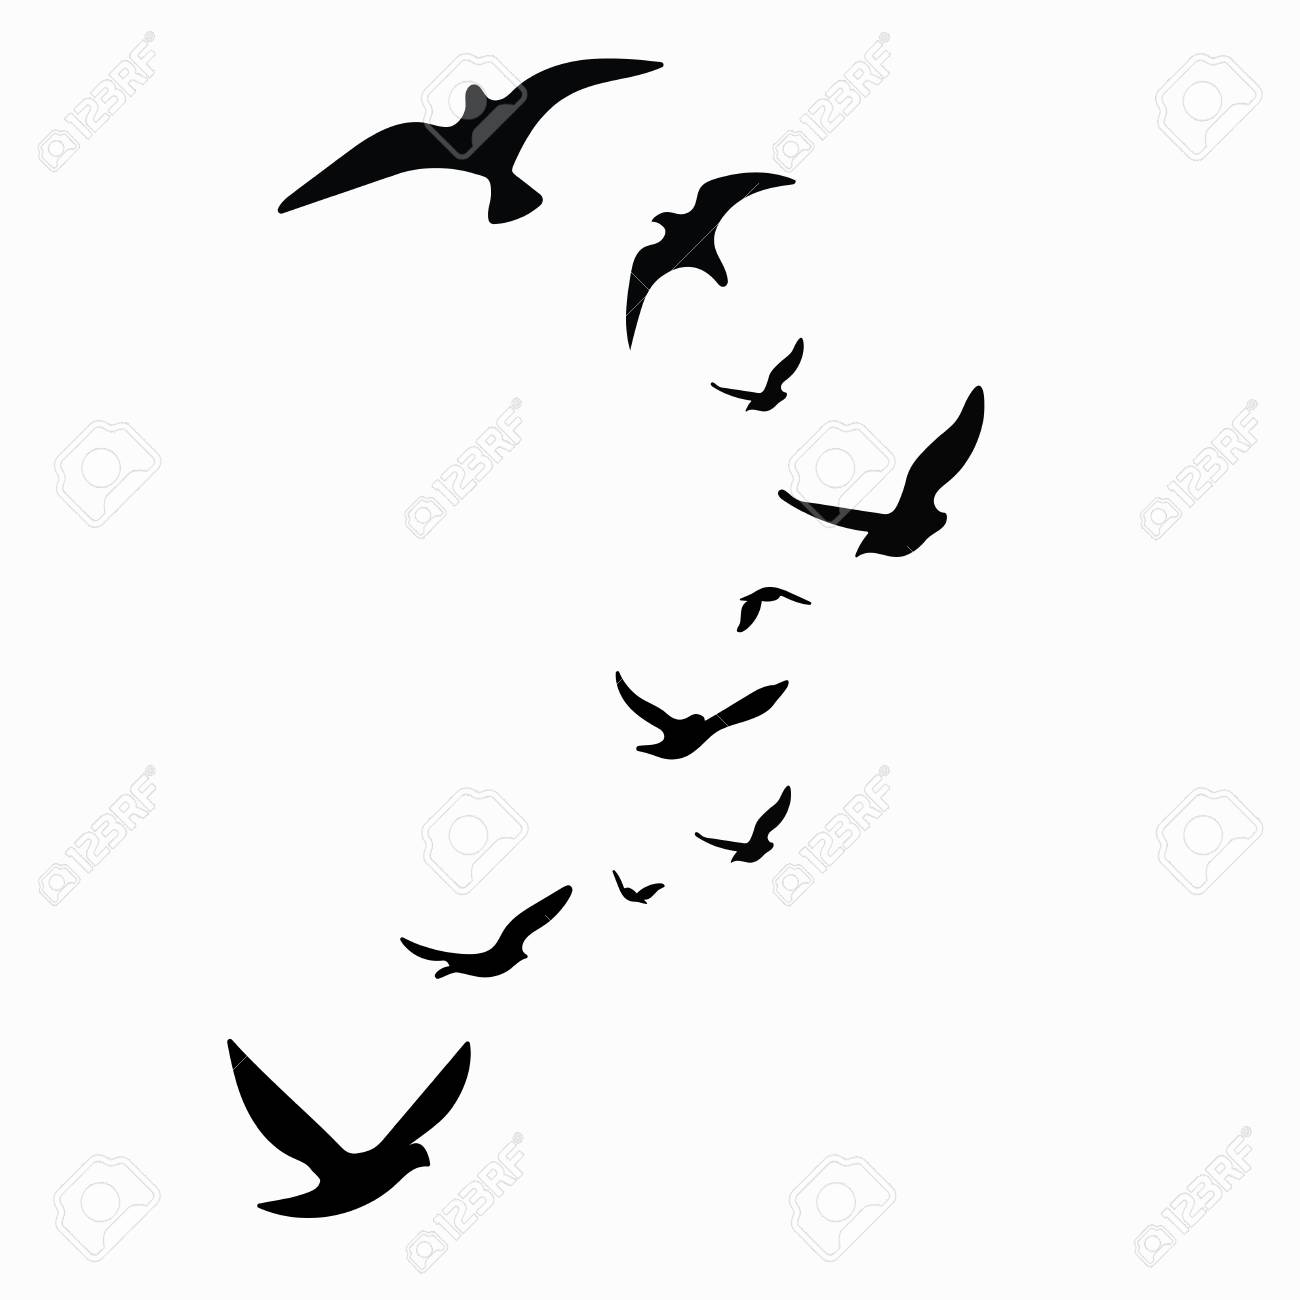 Silhouette Of A Flock Of Birds Black Contours Of Flying Birds within sizing 1300 X 1300